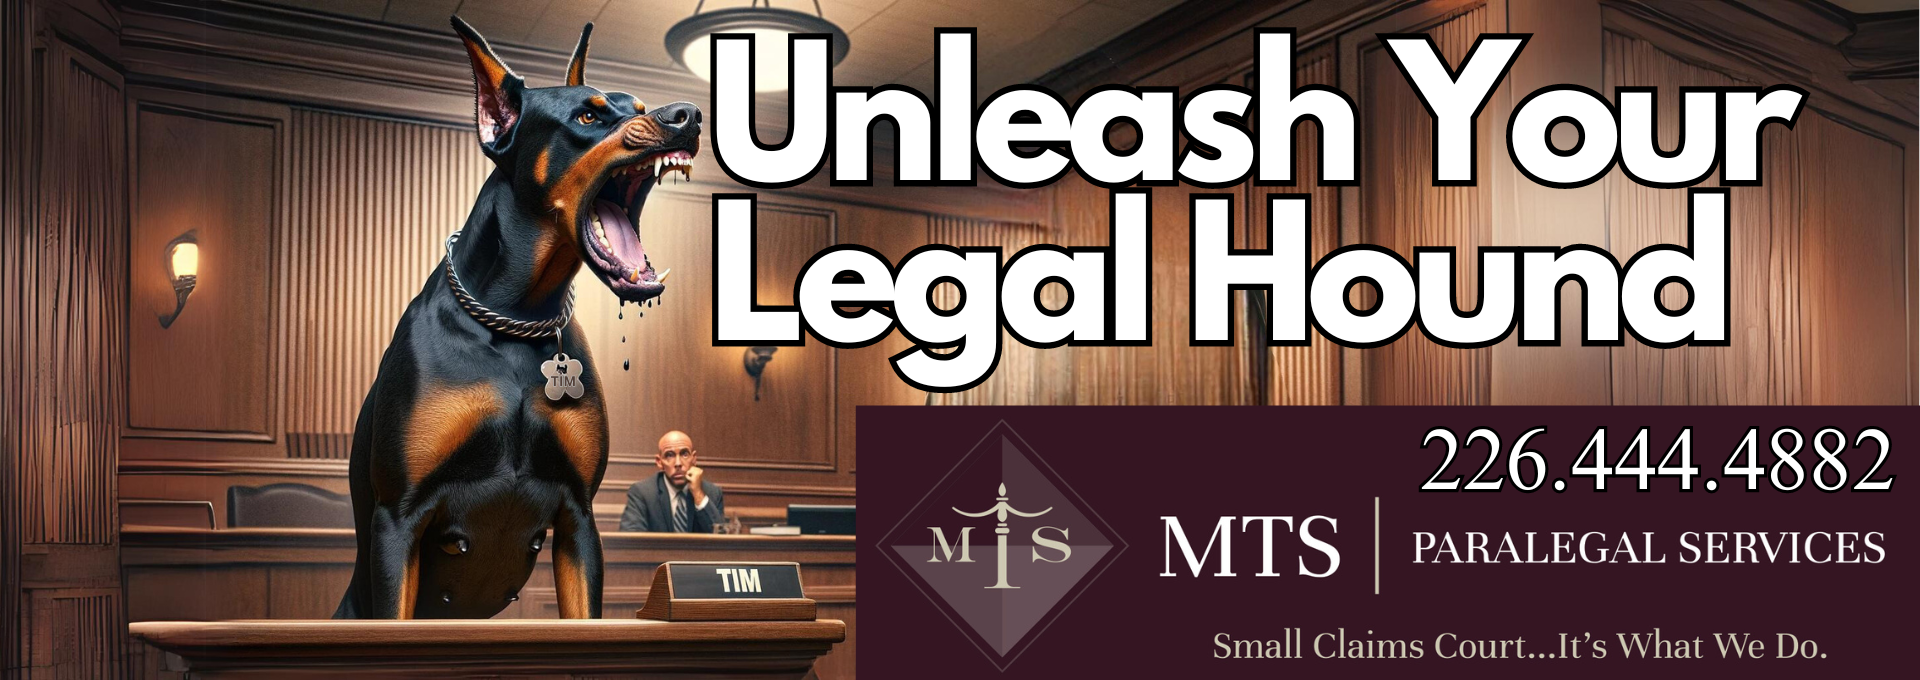 Unleash the hound - Paralegal services